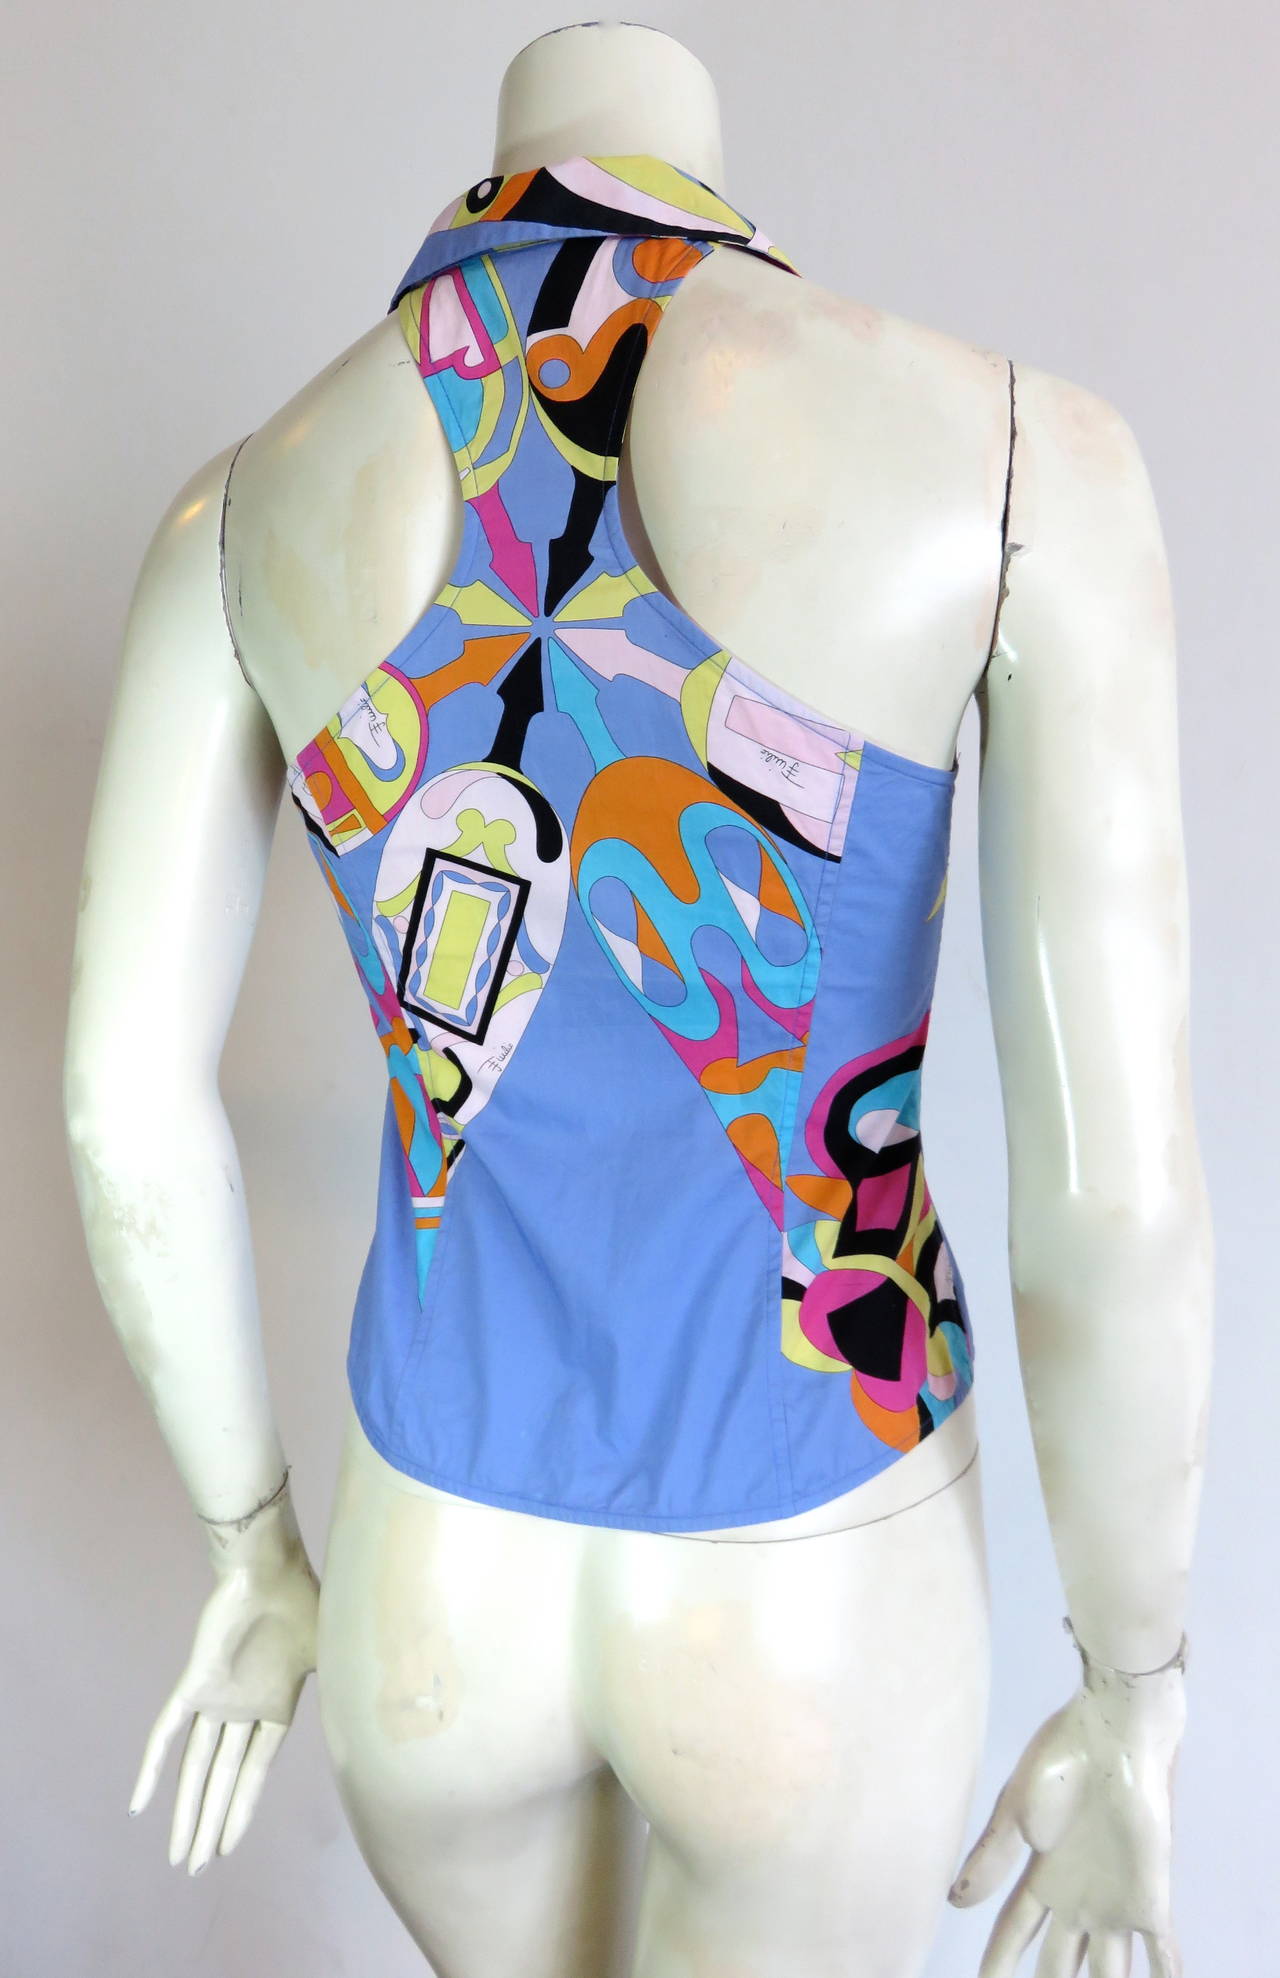 EMILIO PUCCI Geometric printed ruffle shirt In Excellent Condition For Sale In Newport Beach, CA